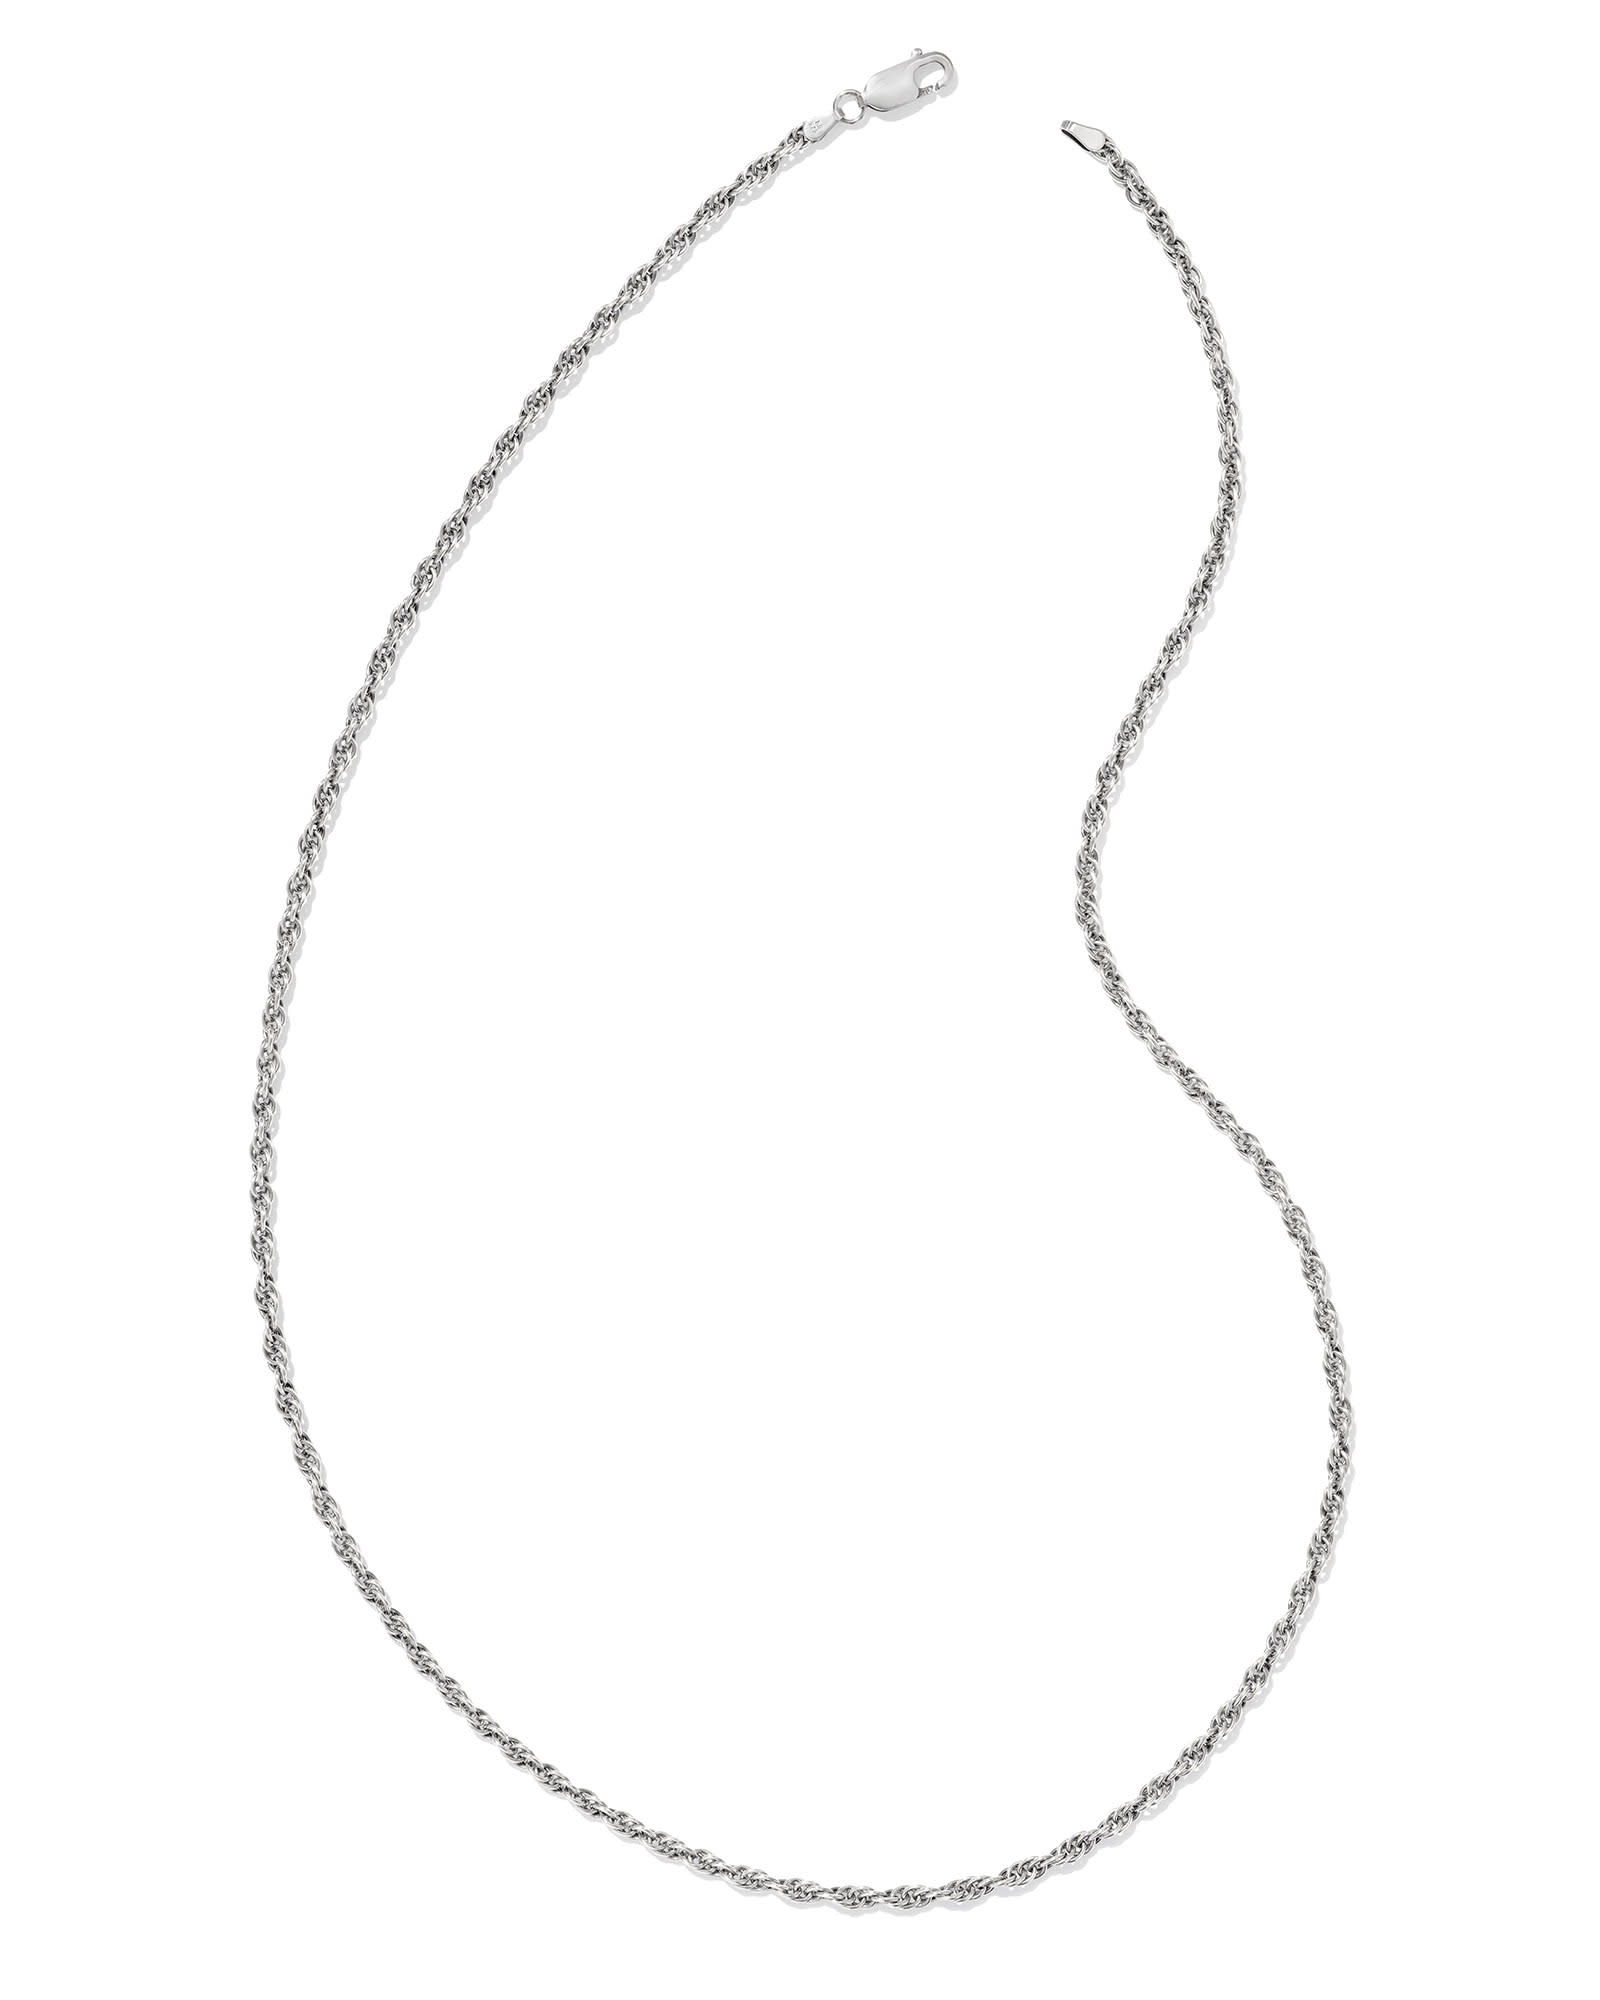 Ryan Rope Chain Necklace in Oxidized Sterling Silver